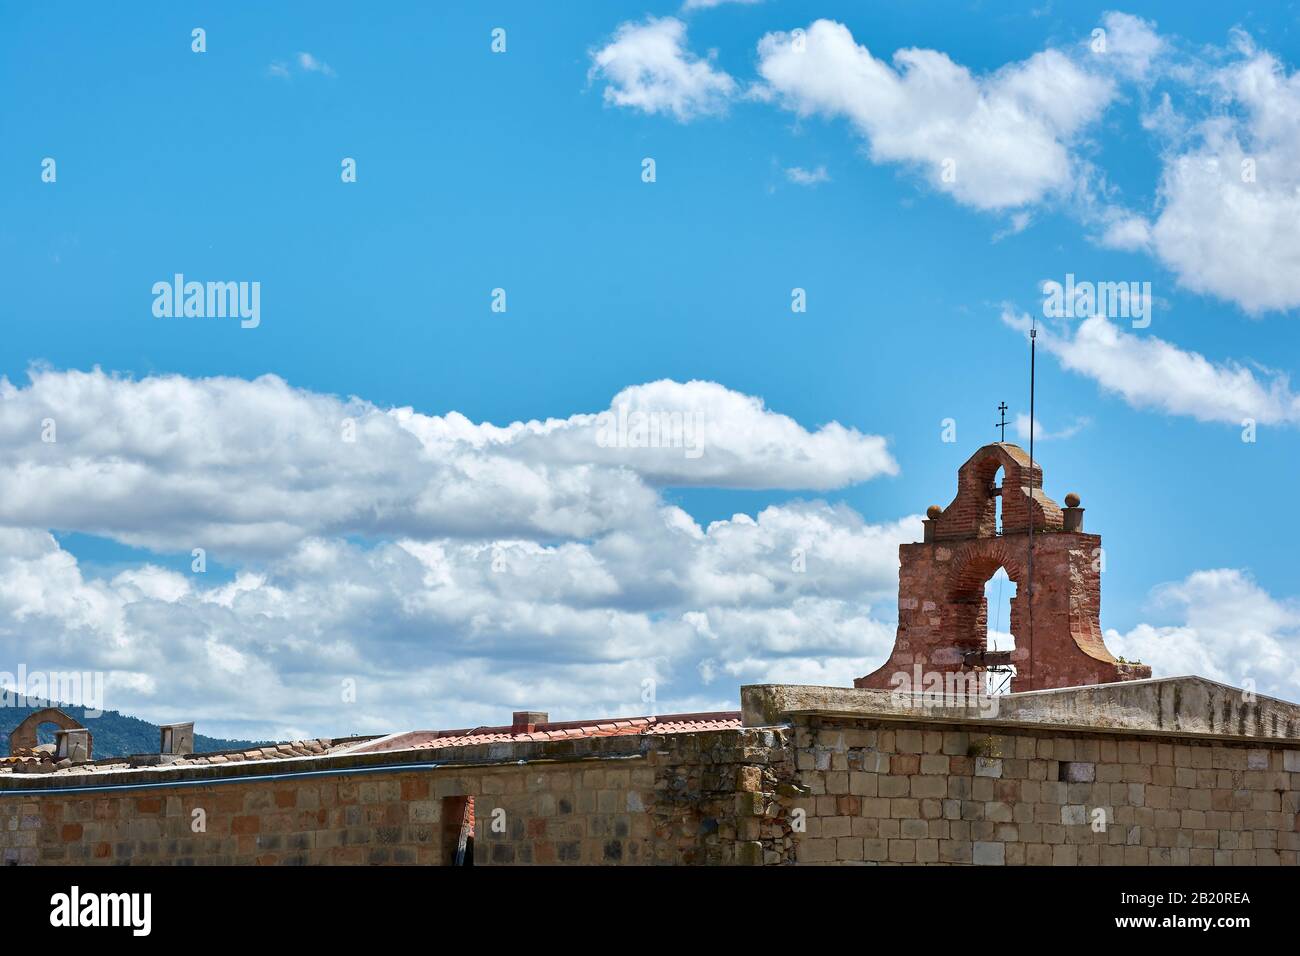 View of the top of the Church of Saint Mary in the medieval city of Montblanc, in the province of Tarragona, Spain. Blue sky with clouds behind. Stock Photo